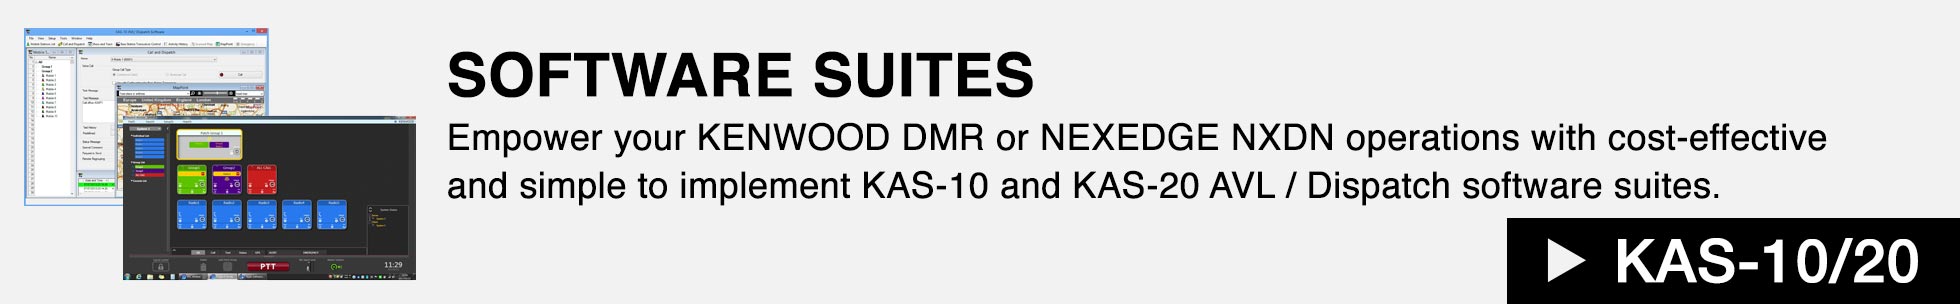 KAS-10 and KAS-20 software suite features